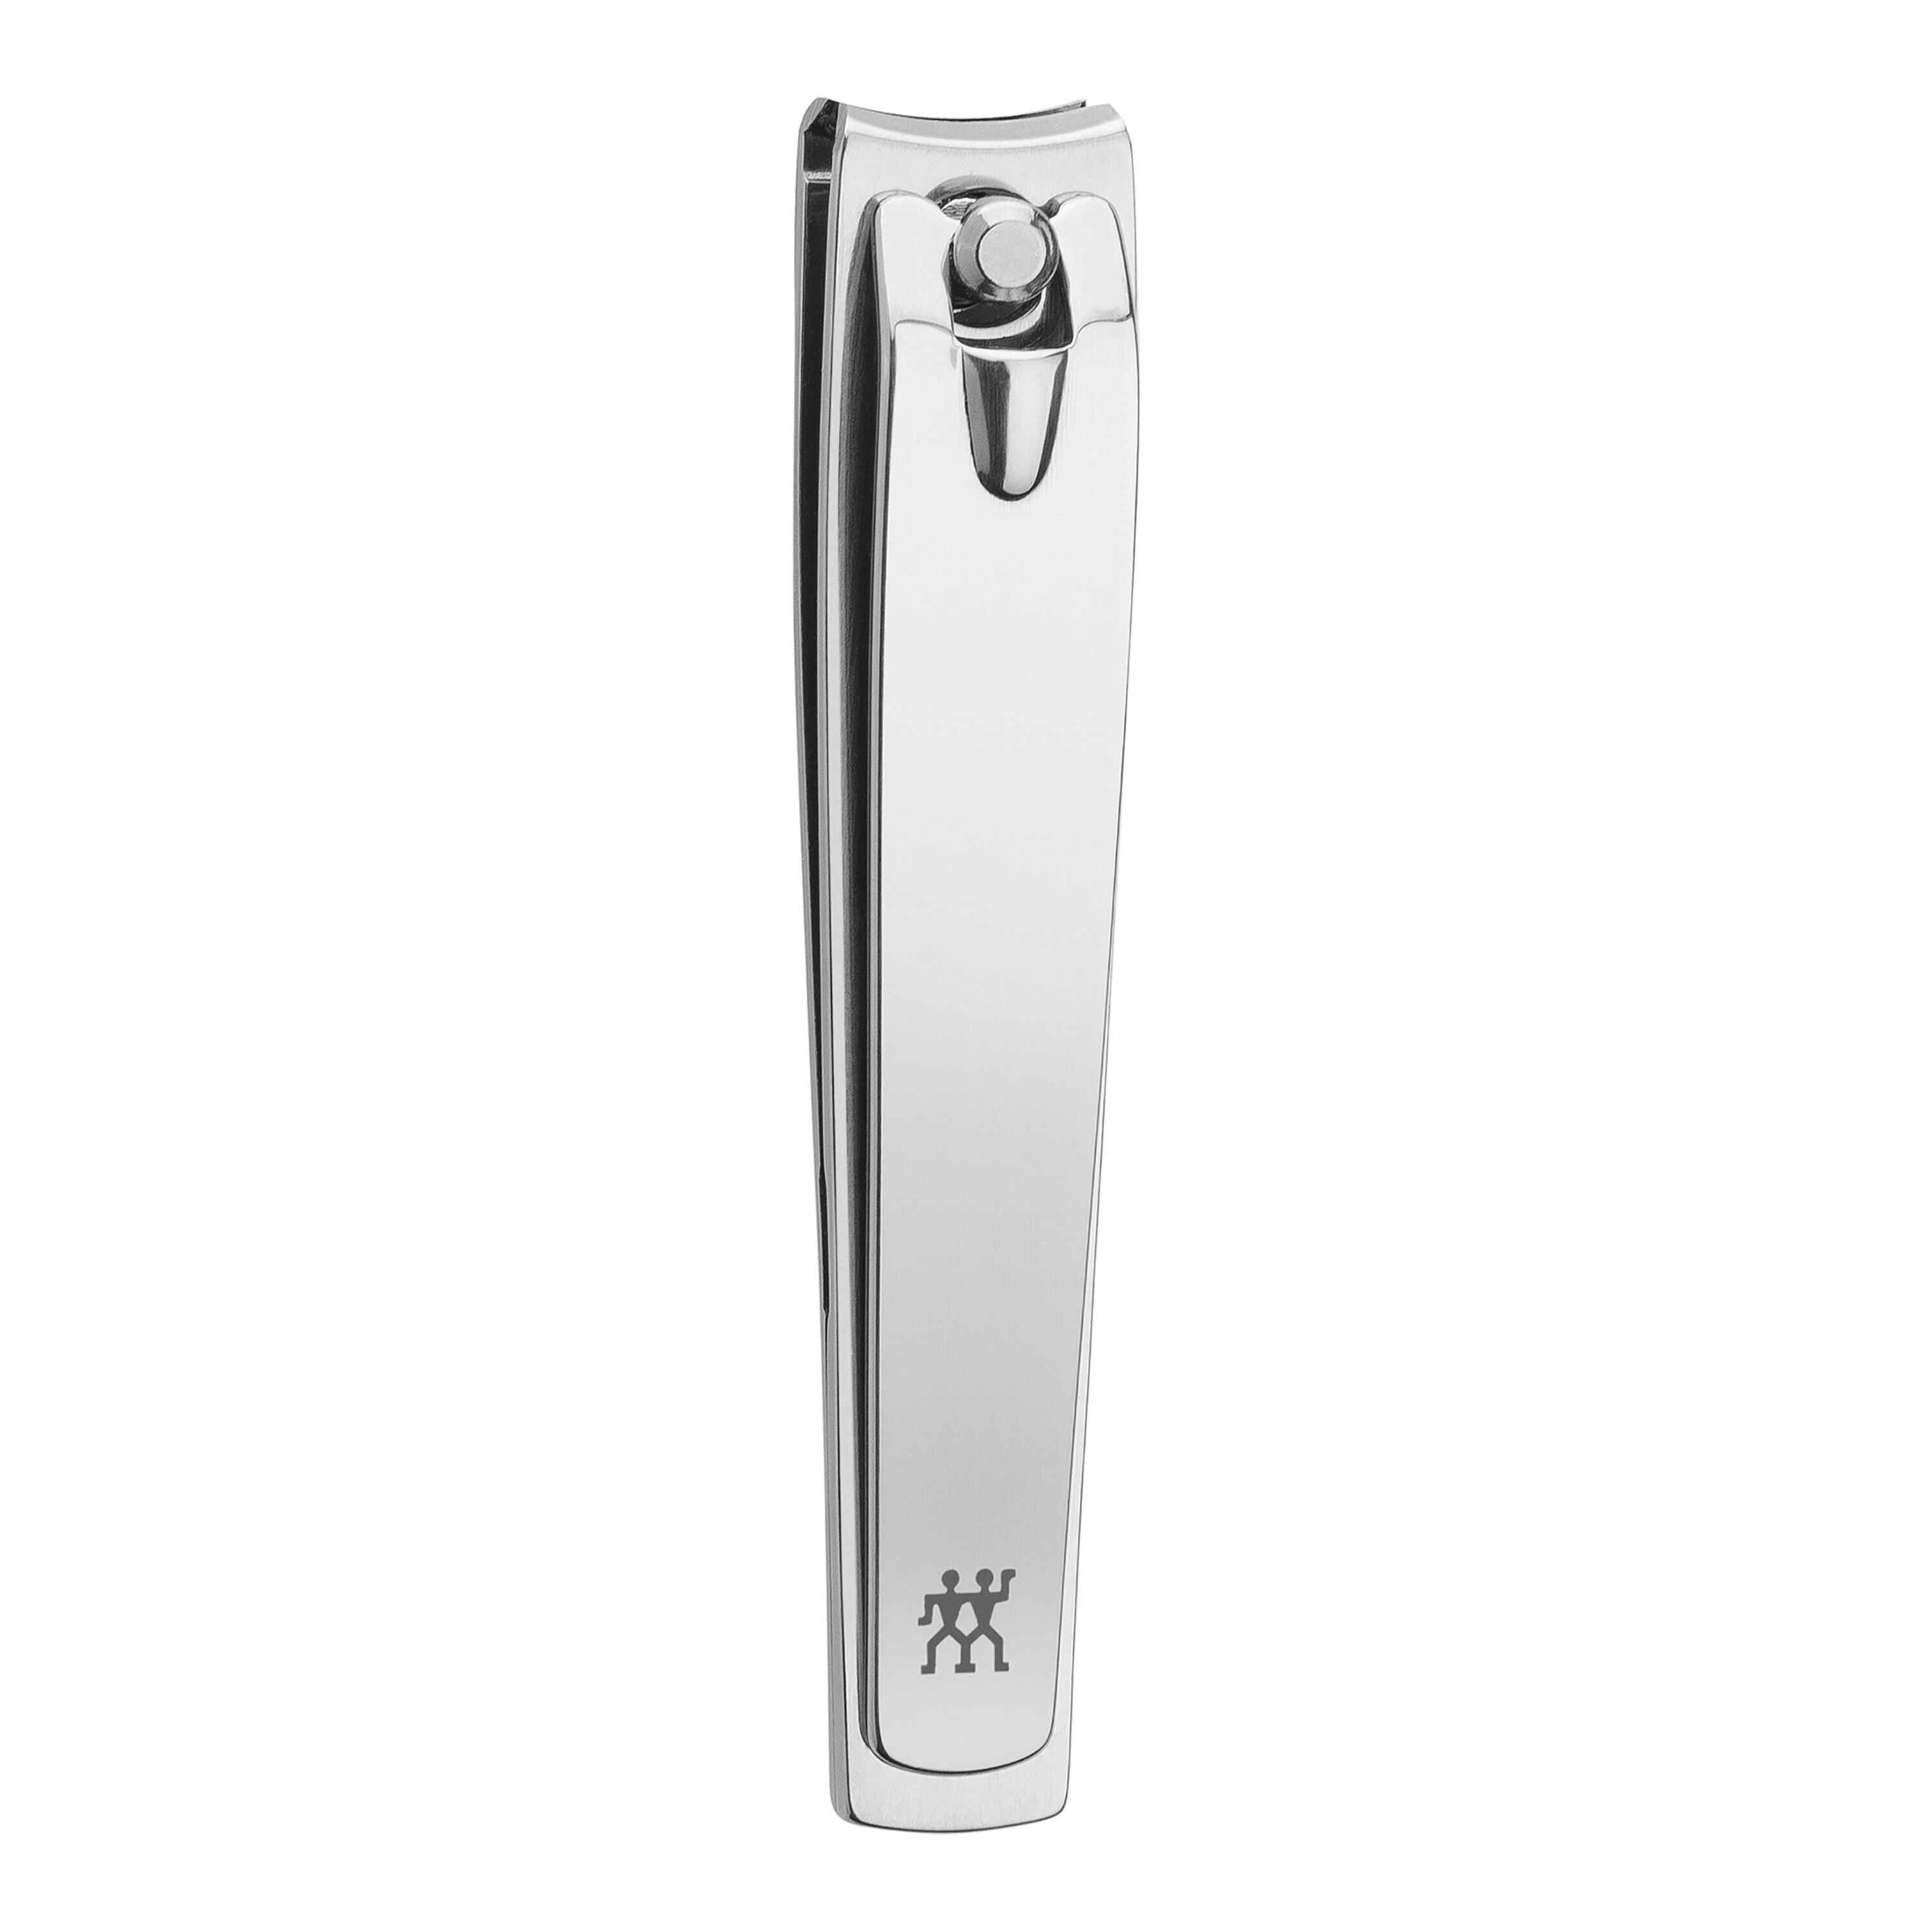 Zwilling J. A. Henckels nail clipper review 